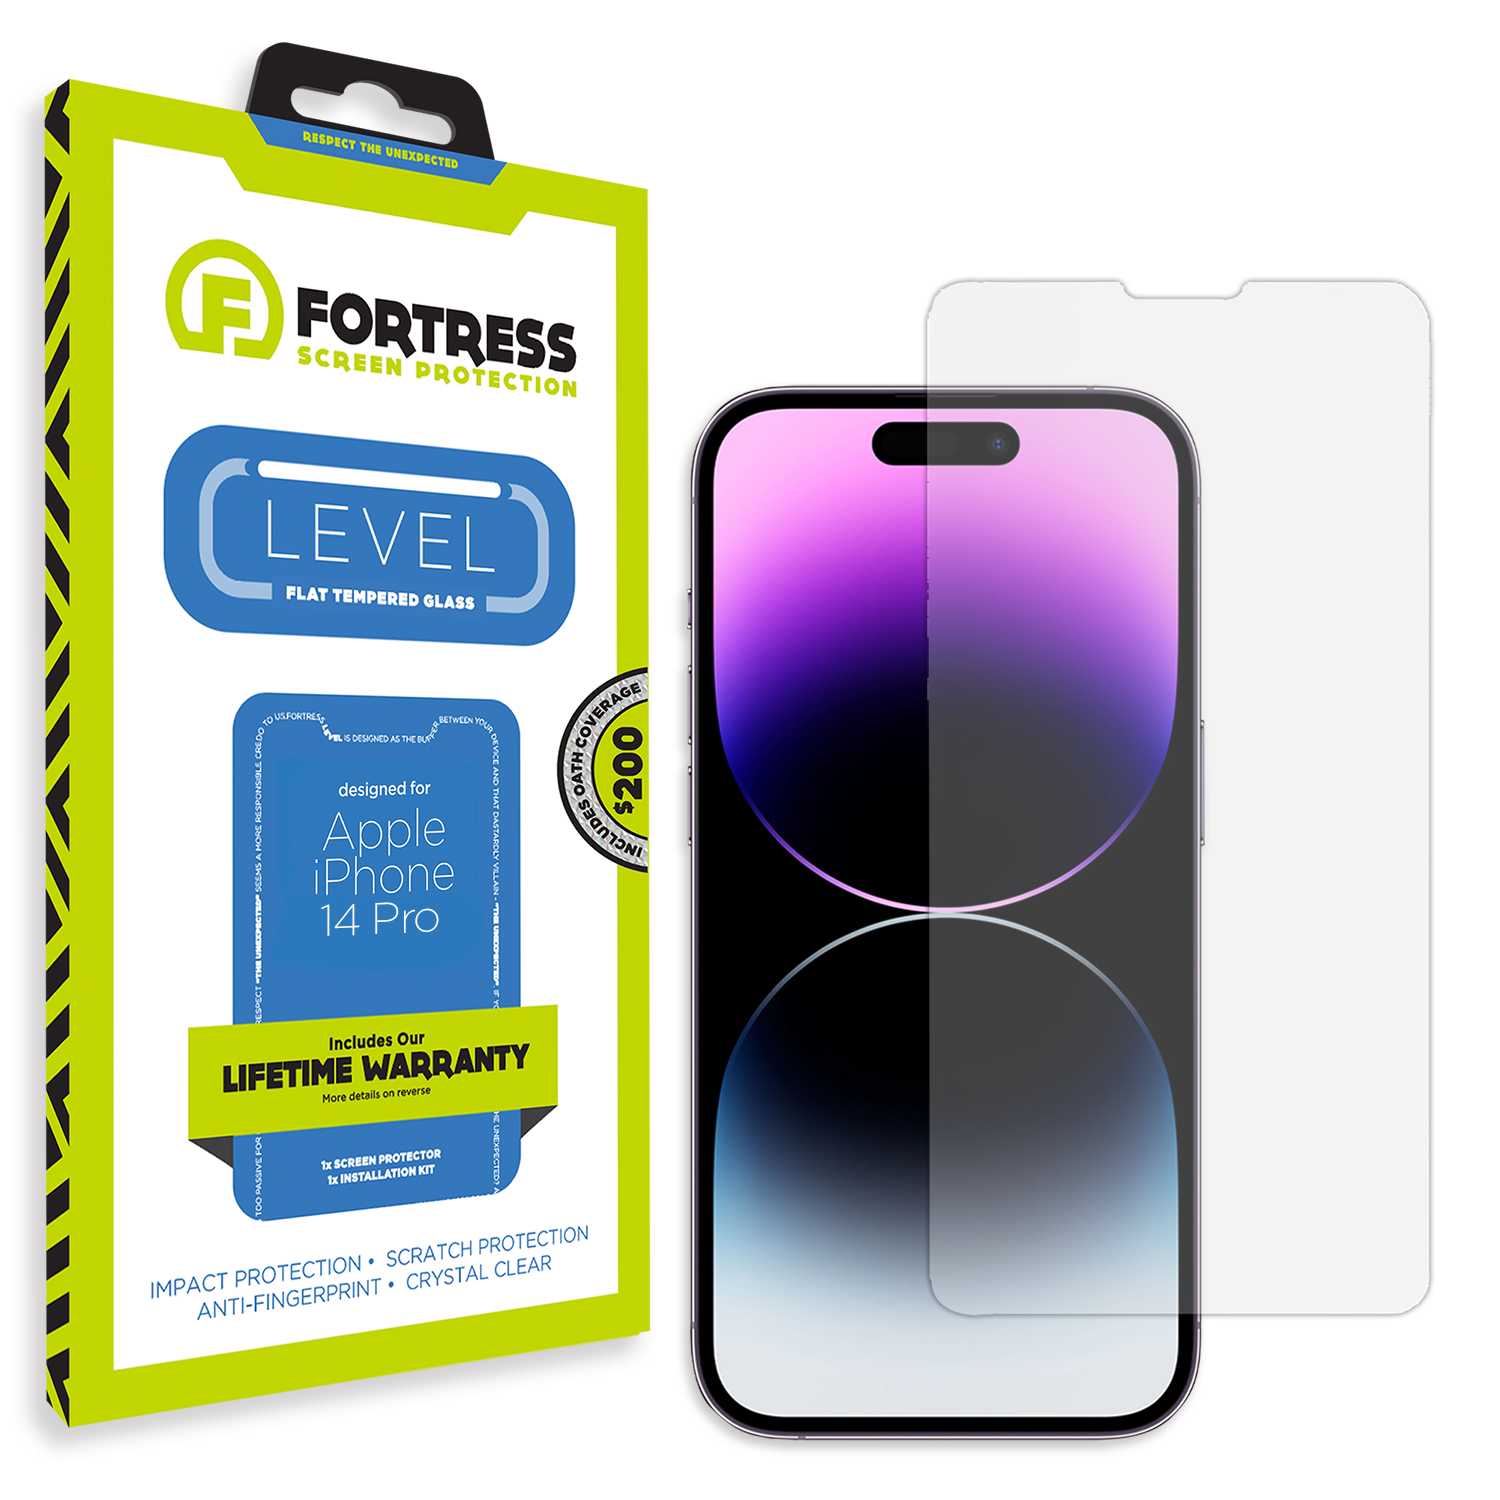 Fortress iPhone 14 Pro Screen Protector $200Coverage Scooch Screen Protector